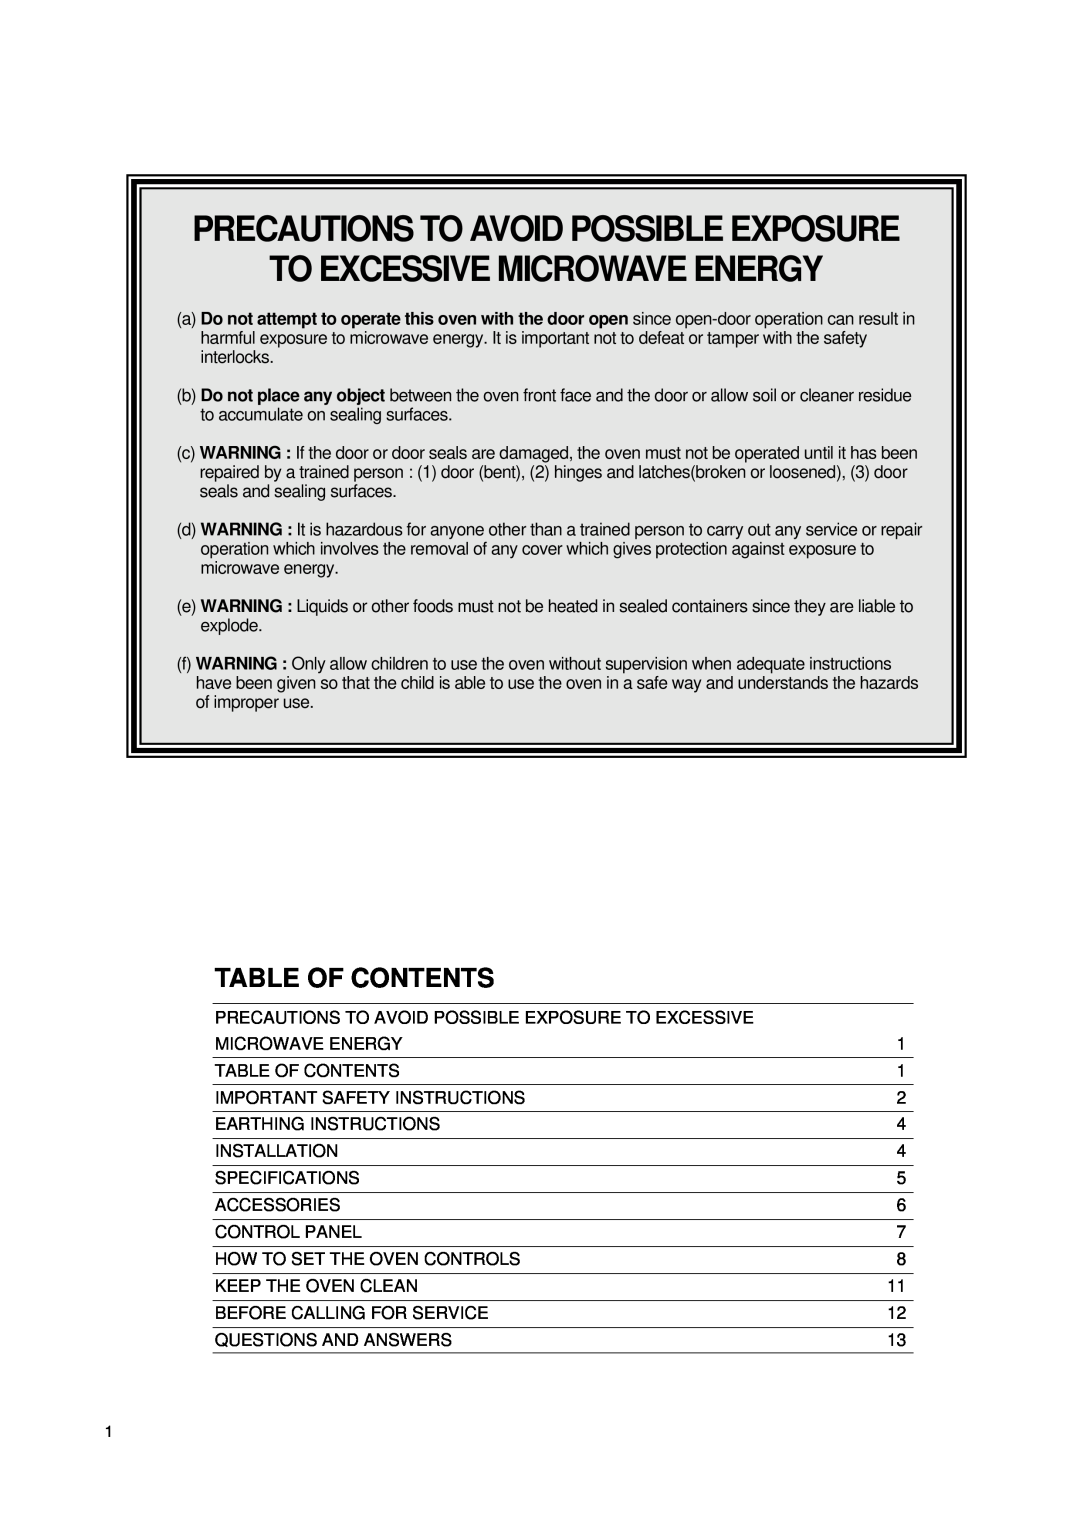 Daewoo KOG-8755 manual Precautions To Avoid Possible Exposure, To Excessive Microwave Energy, Table Of Contents 